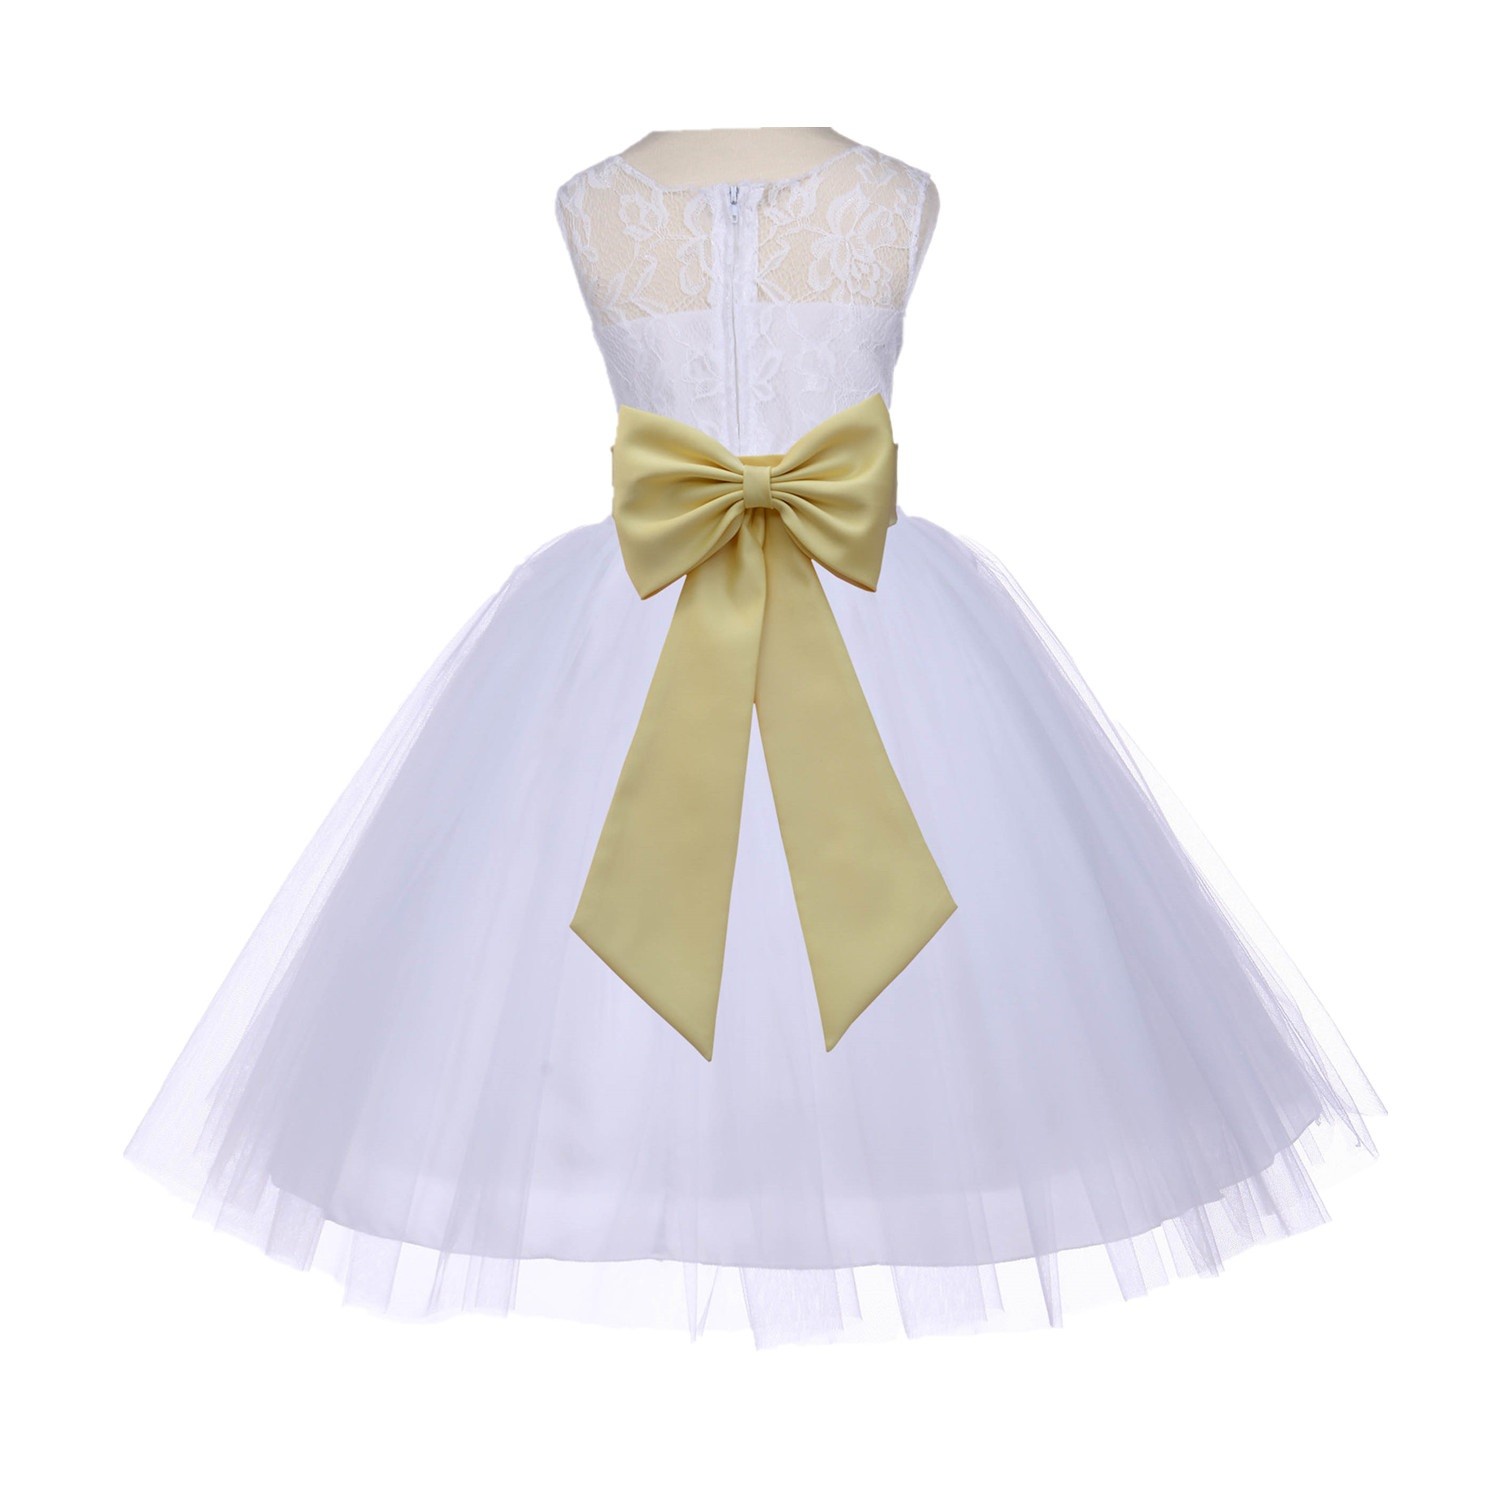 White/Canary Floral Lace Bodice Tulle Flower Girl Dress Wedding 153T